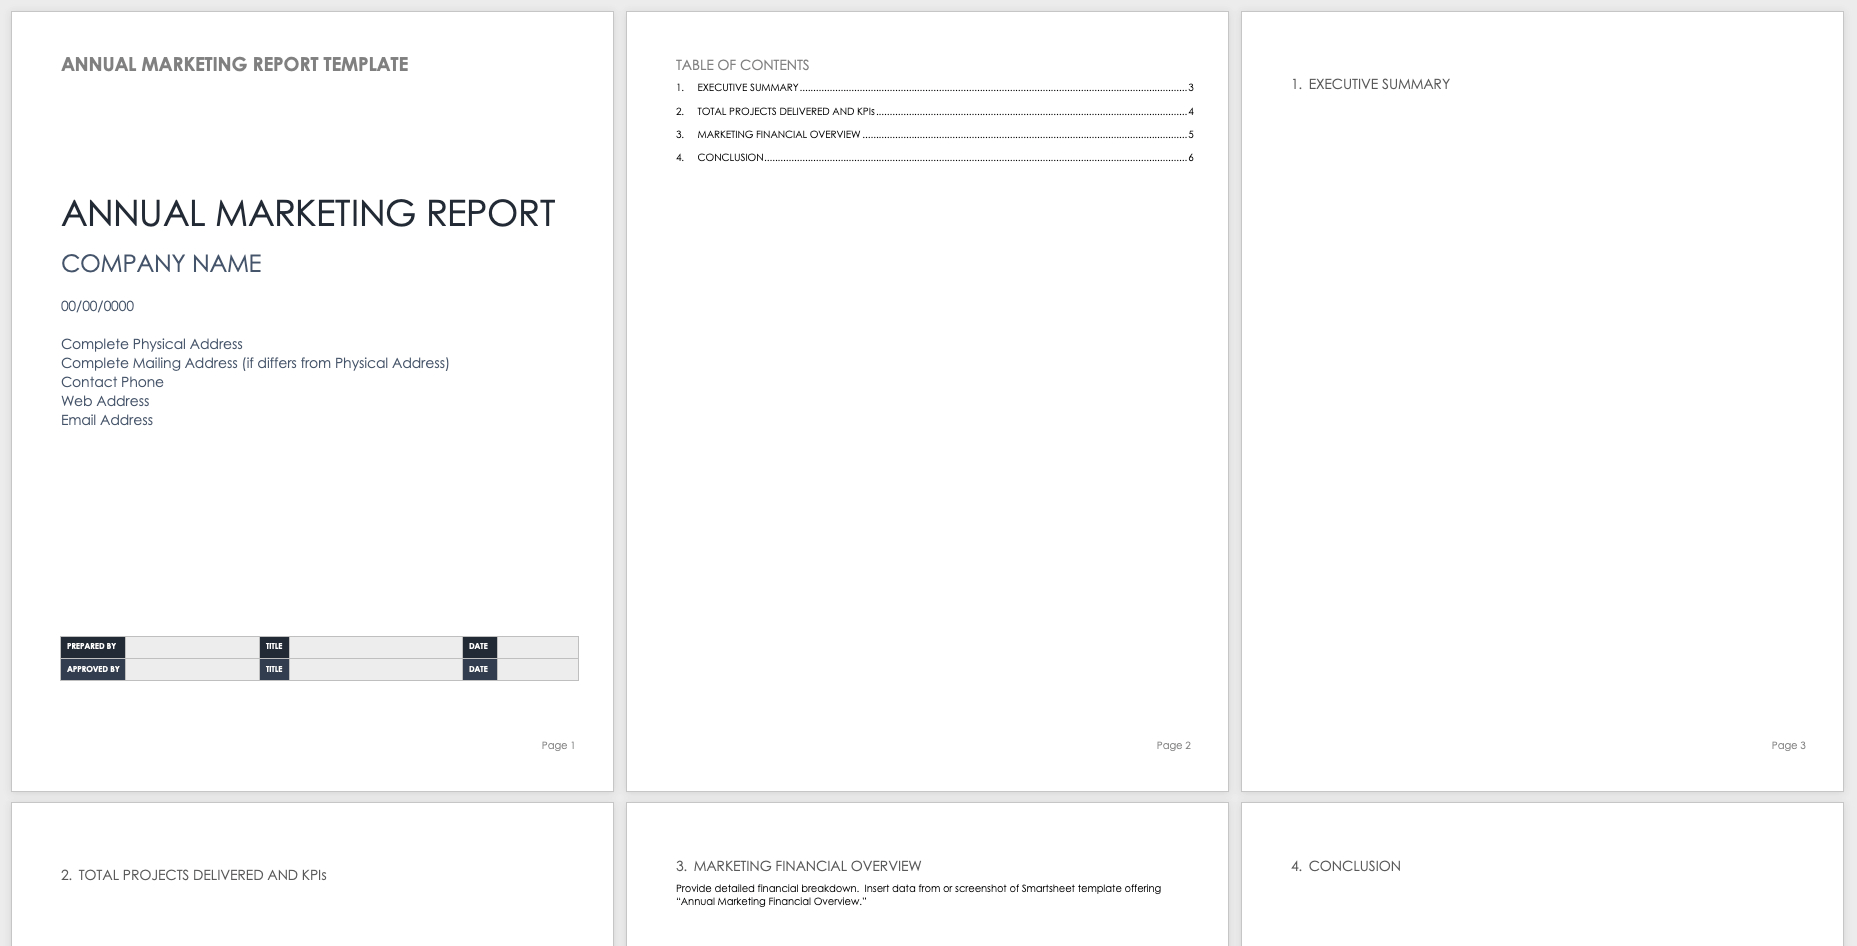 Free Year End Report Templates | Smartsheet For Annual Financial Report Template Word